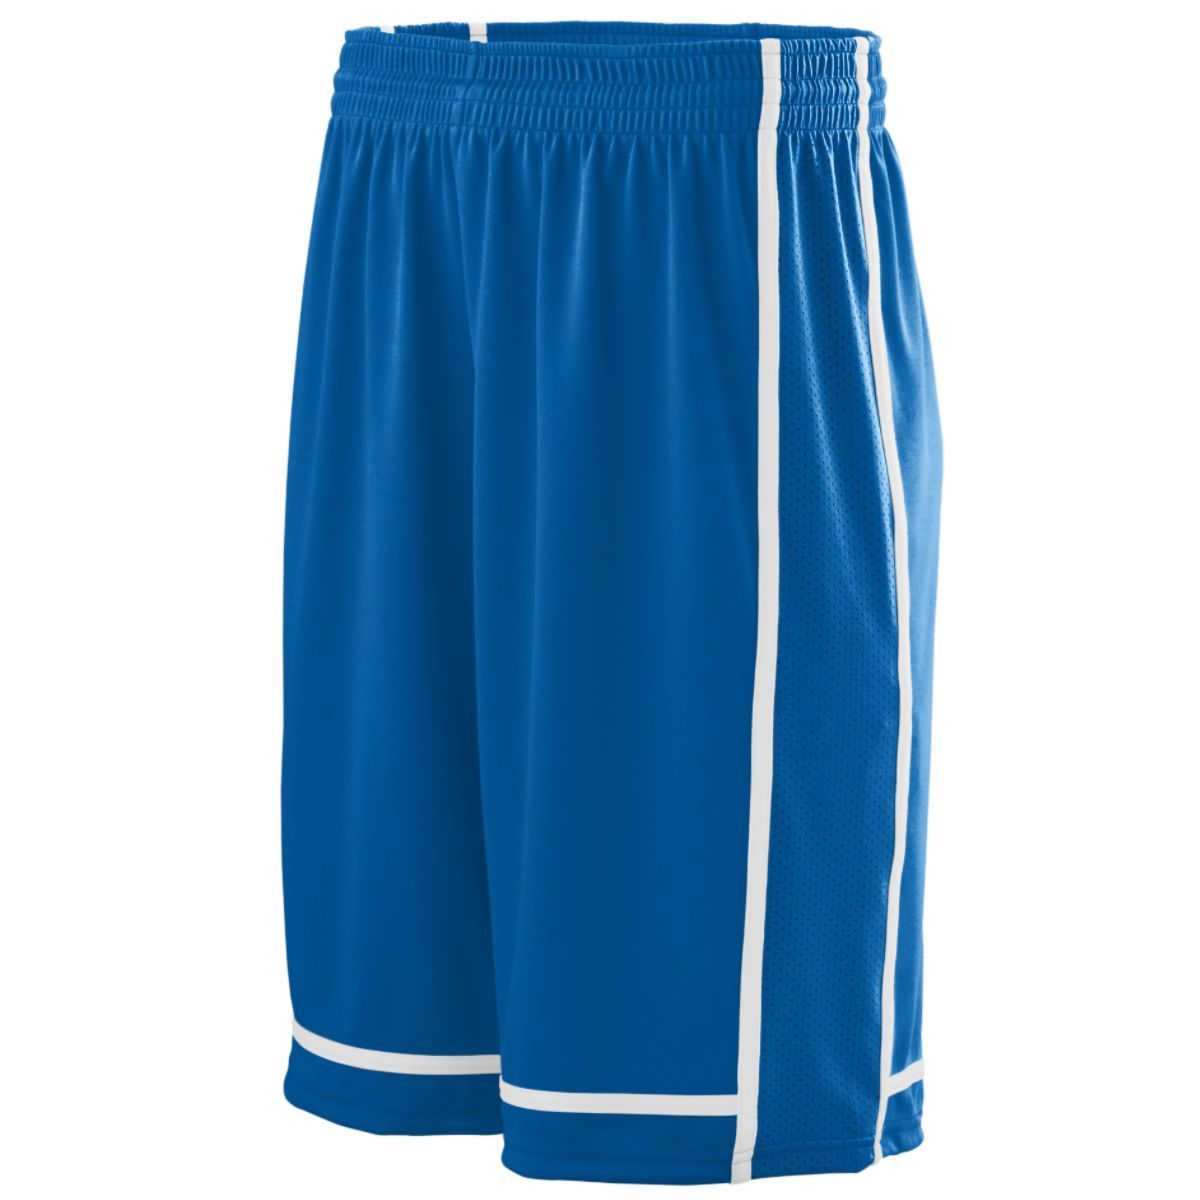 Augusta Sportswear Winning Streak Shorts in Royal/White  -Part of the Adult, Adult-Shorts, Augusta-Products, Basketball, All-Sports, All-Sports-1 product lines at KanaleyCreations.com